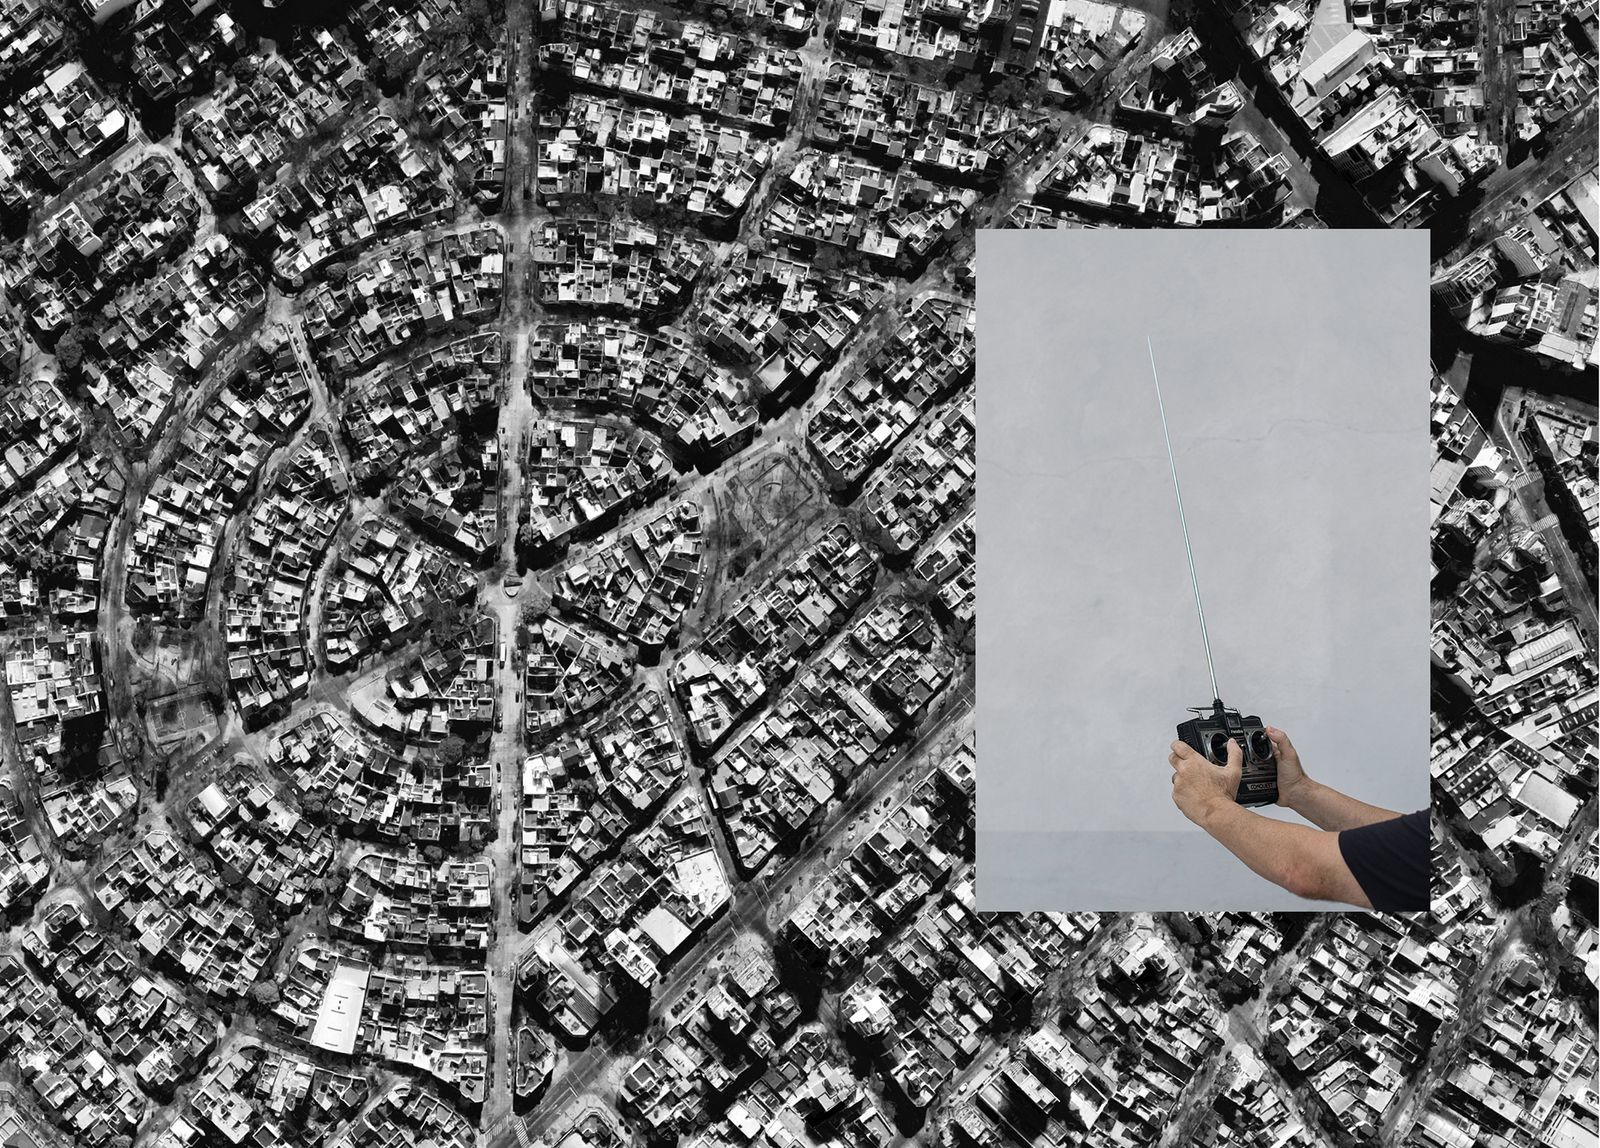 © Luis Cobelo - The map and the explorerLito, the explorer, have a artifact to move in the neigborhood